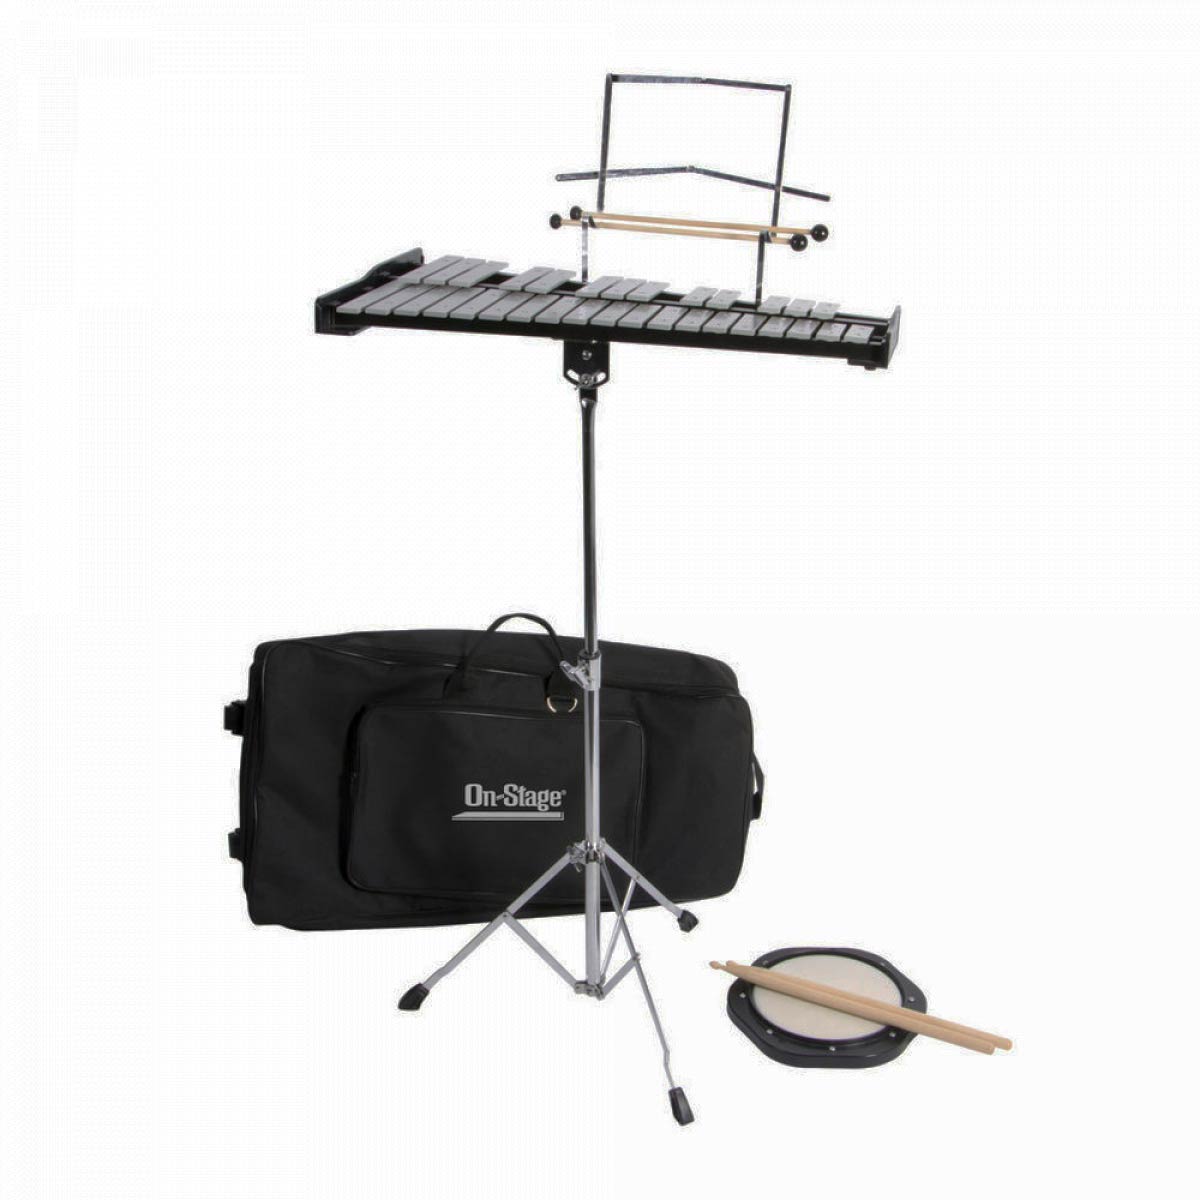 On-Stage BSK2500 32 Bell Kit with Stand, Mallets, Drumsticks, 8" Practice Pad, and Rolling Backpack